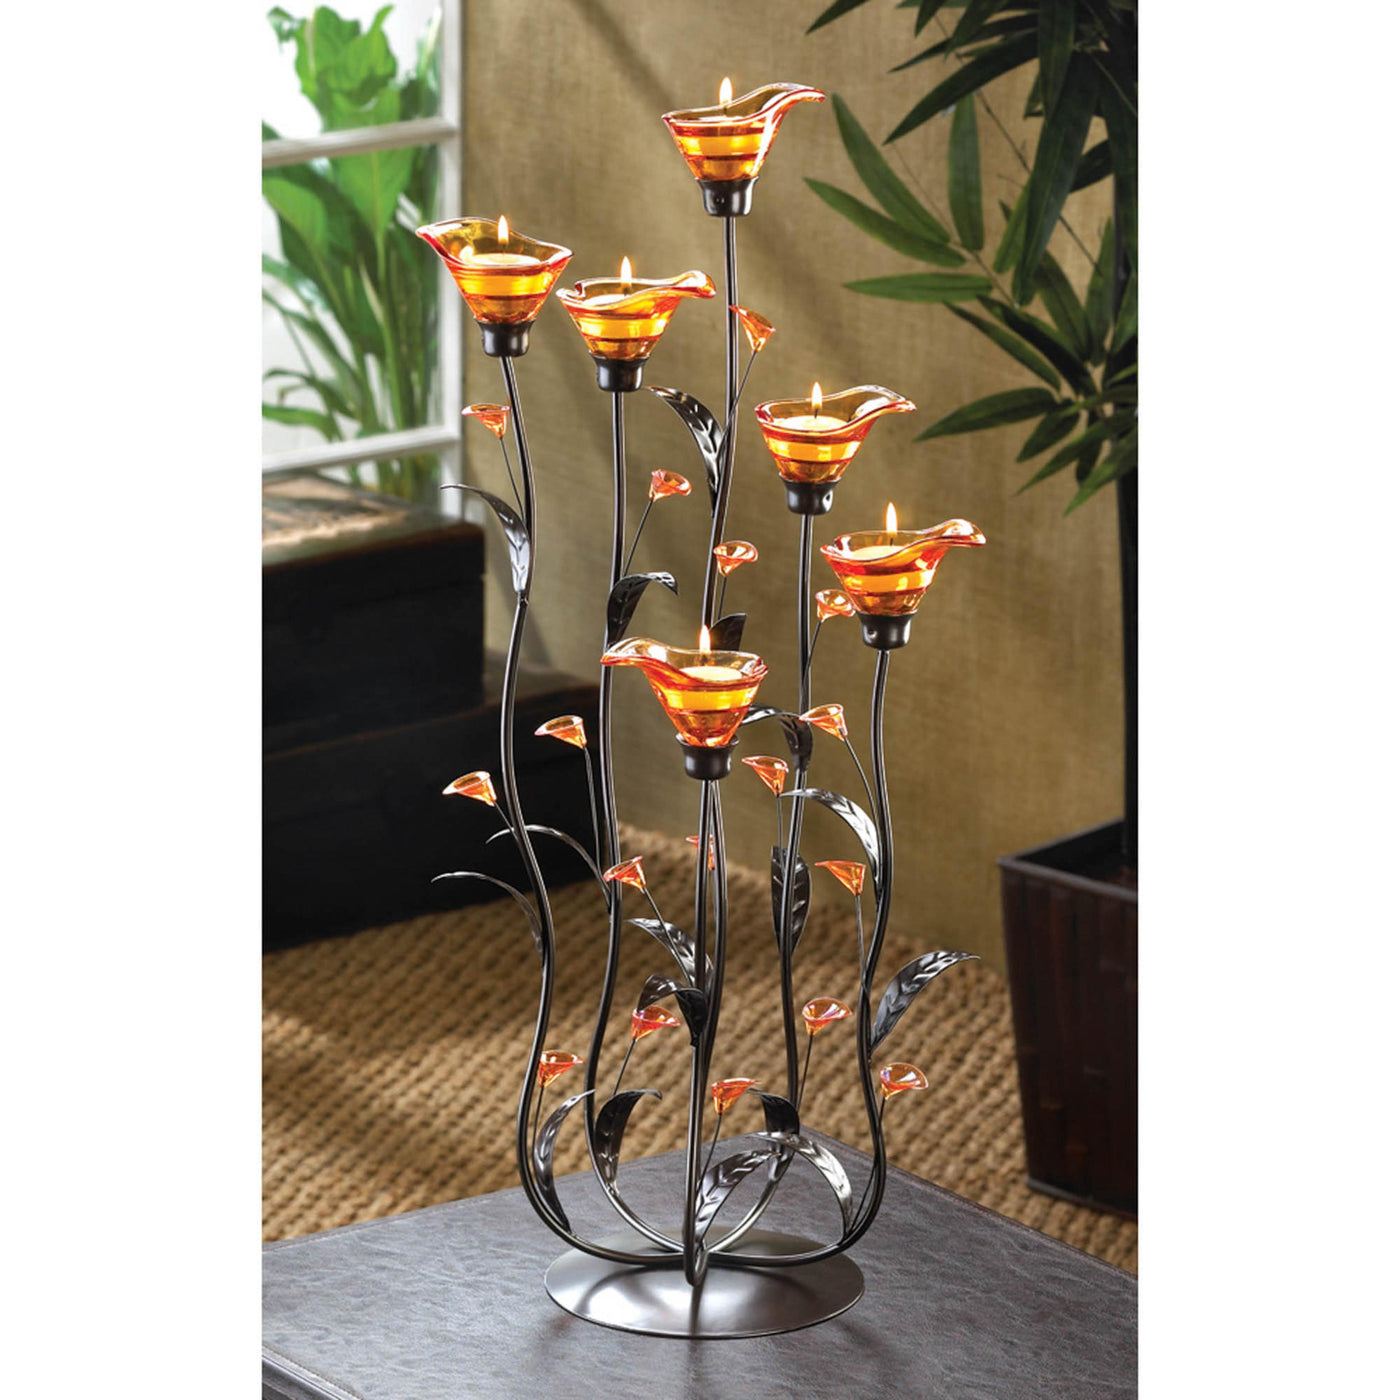 Amber Calla Lily Candle Holder Home Decor with flames